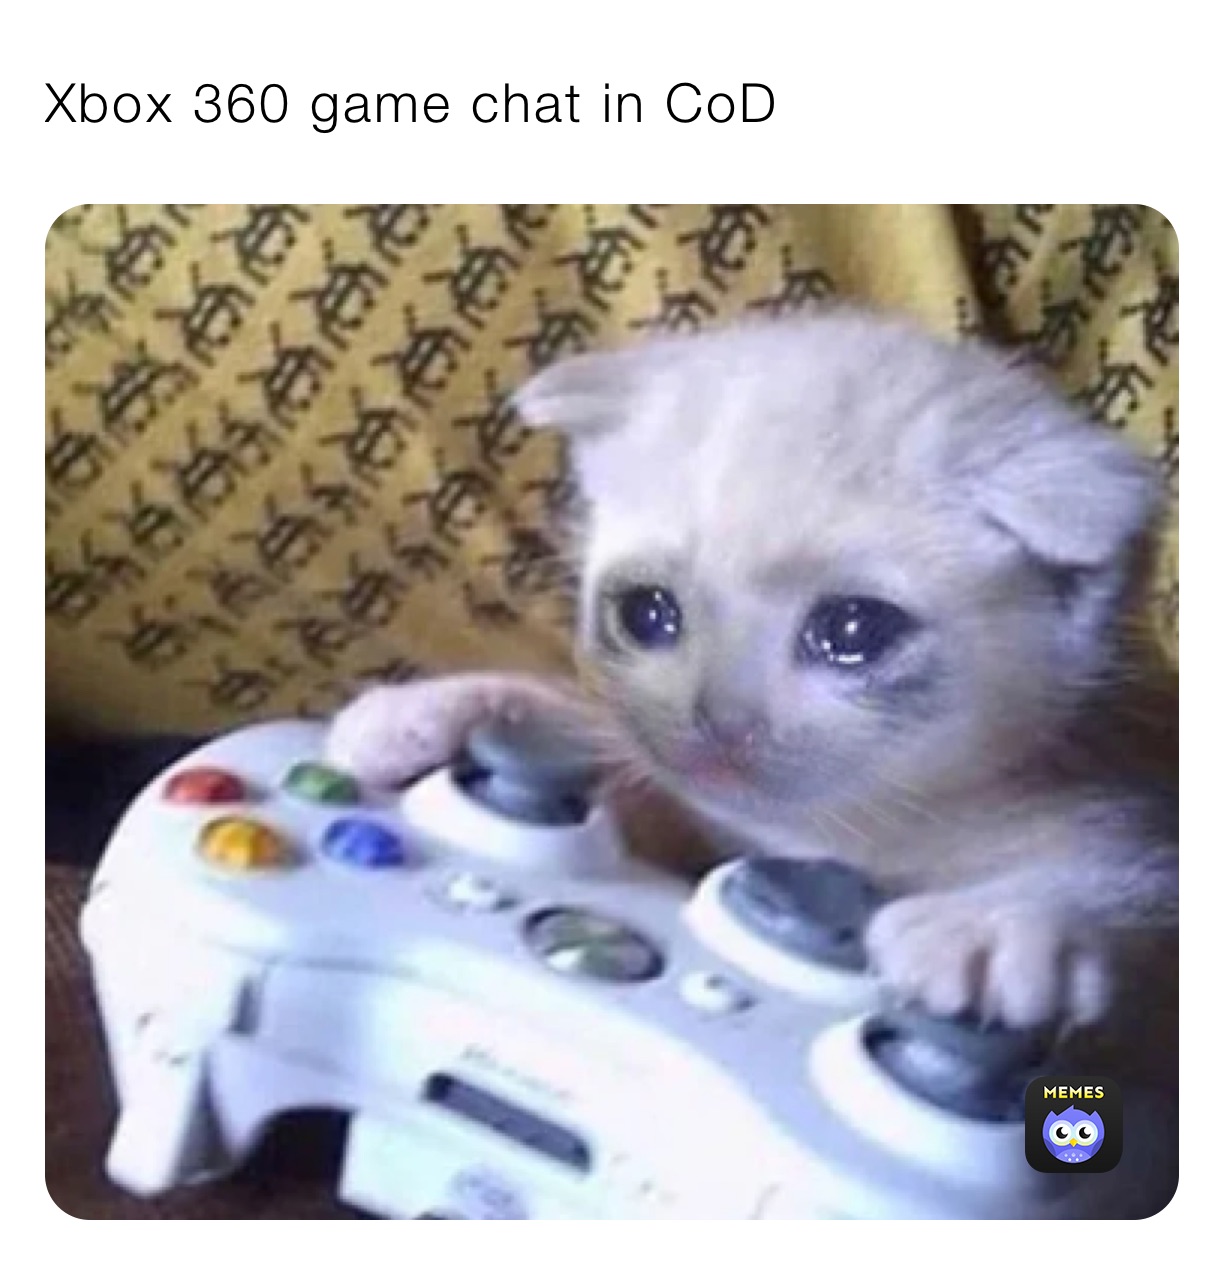 Xbox 360 game chat in CoD